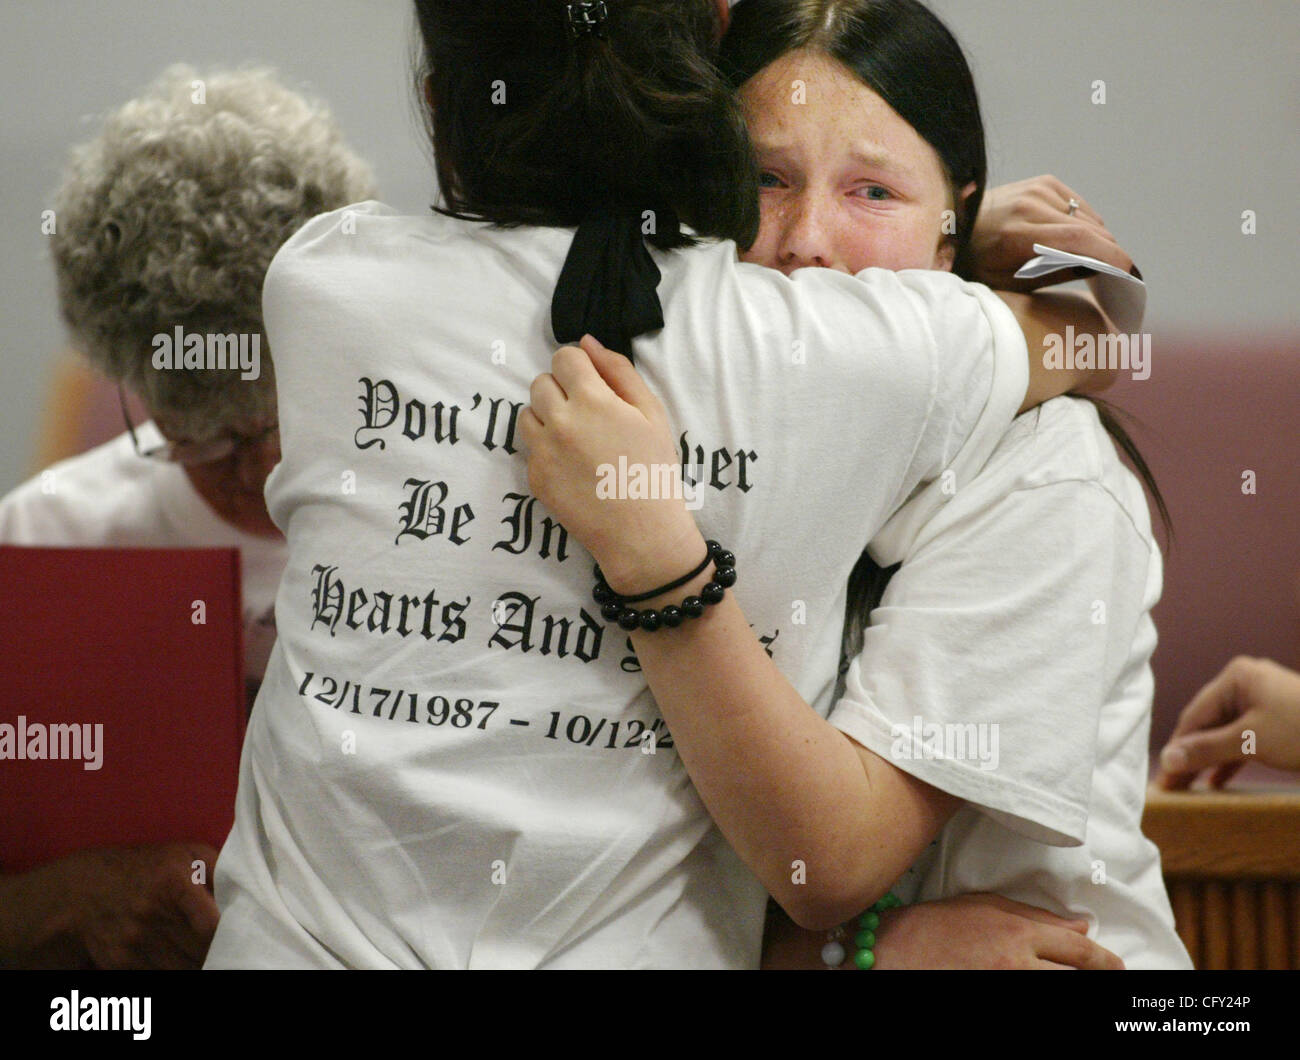 050307 tc met slsnedden-(1of 6)- Staff Photo by Amanda Voisard/ The Palm Beach Post  0037526A --WITH STORY BY Sarah Prohaska ---Fort Pierce--Bobb DeCara sister,  Heaven Laywell, right, is comforted by her cousin while waiting to speak before Judge Conner during the sentencing of Joy Snedden, Thursda Stock Photo